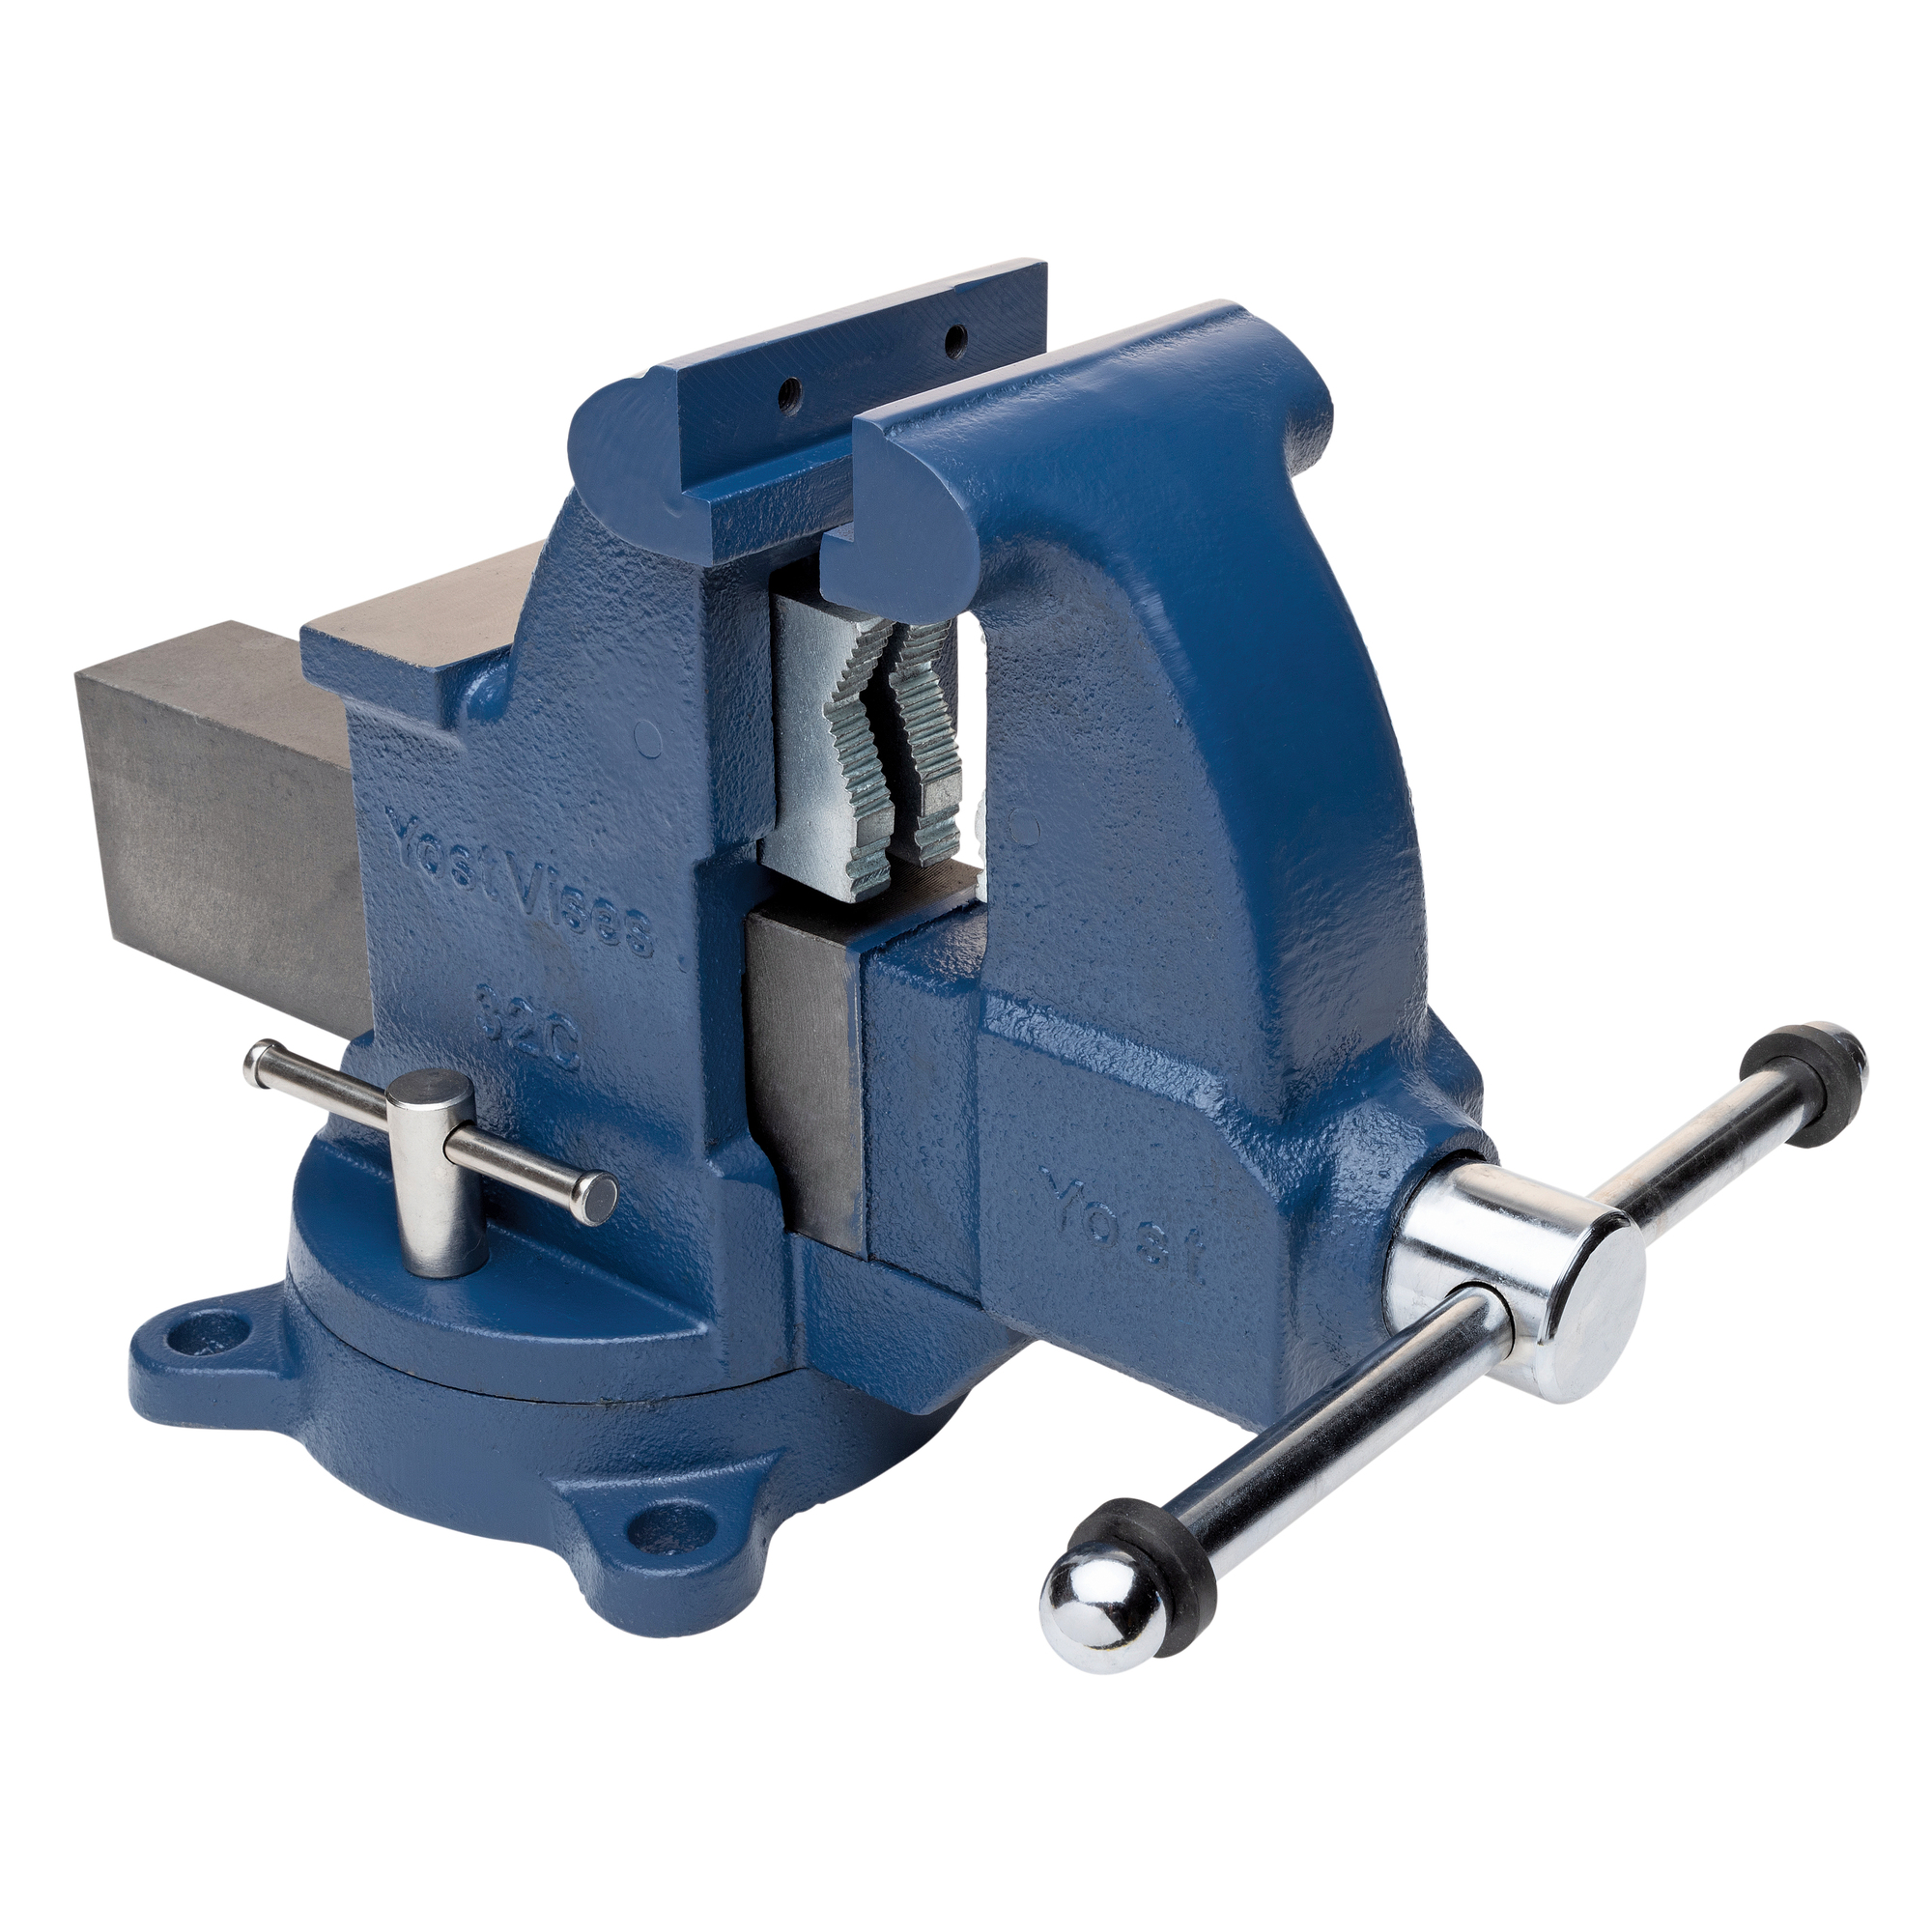 Yost Vises, 4.5Inch HD Combo Vise, Jaw Width 4.5 in, Jaw Capacity 6 in, Material Ductile Iron, Model 32C -  56389